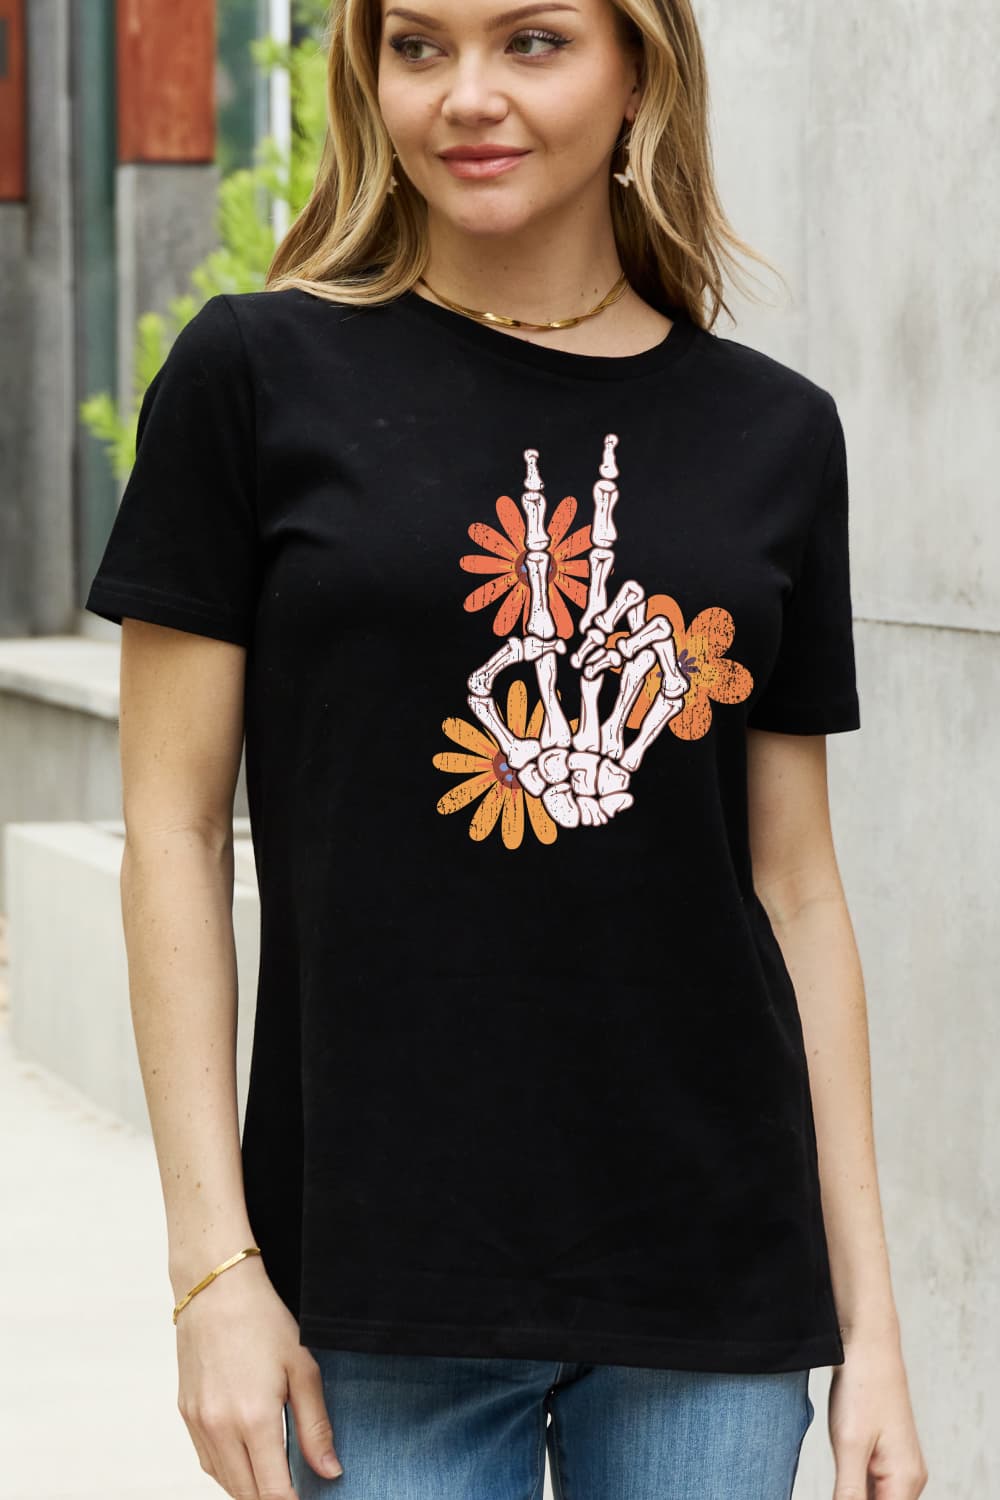 Full Size Skeleton Hand Graphic Cotton Tee - T-Shirts - Shirts & Tops - 4 - 2024